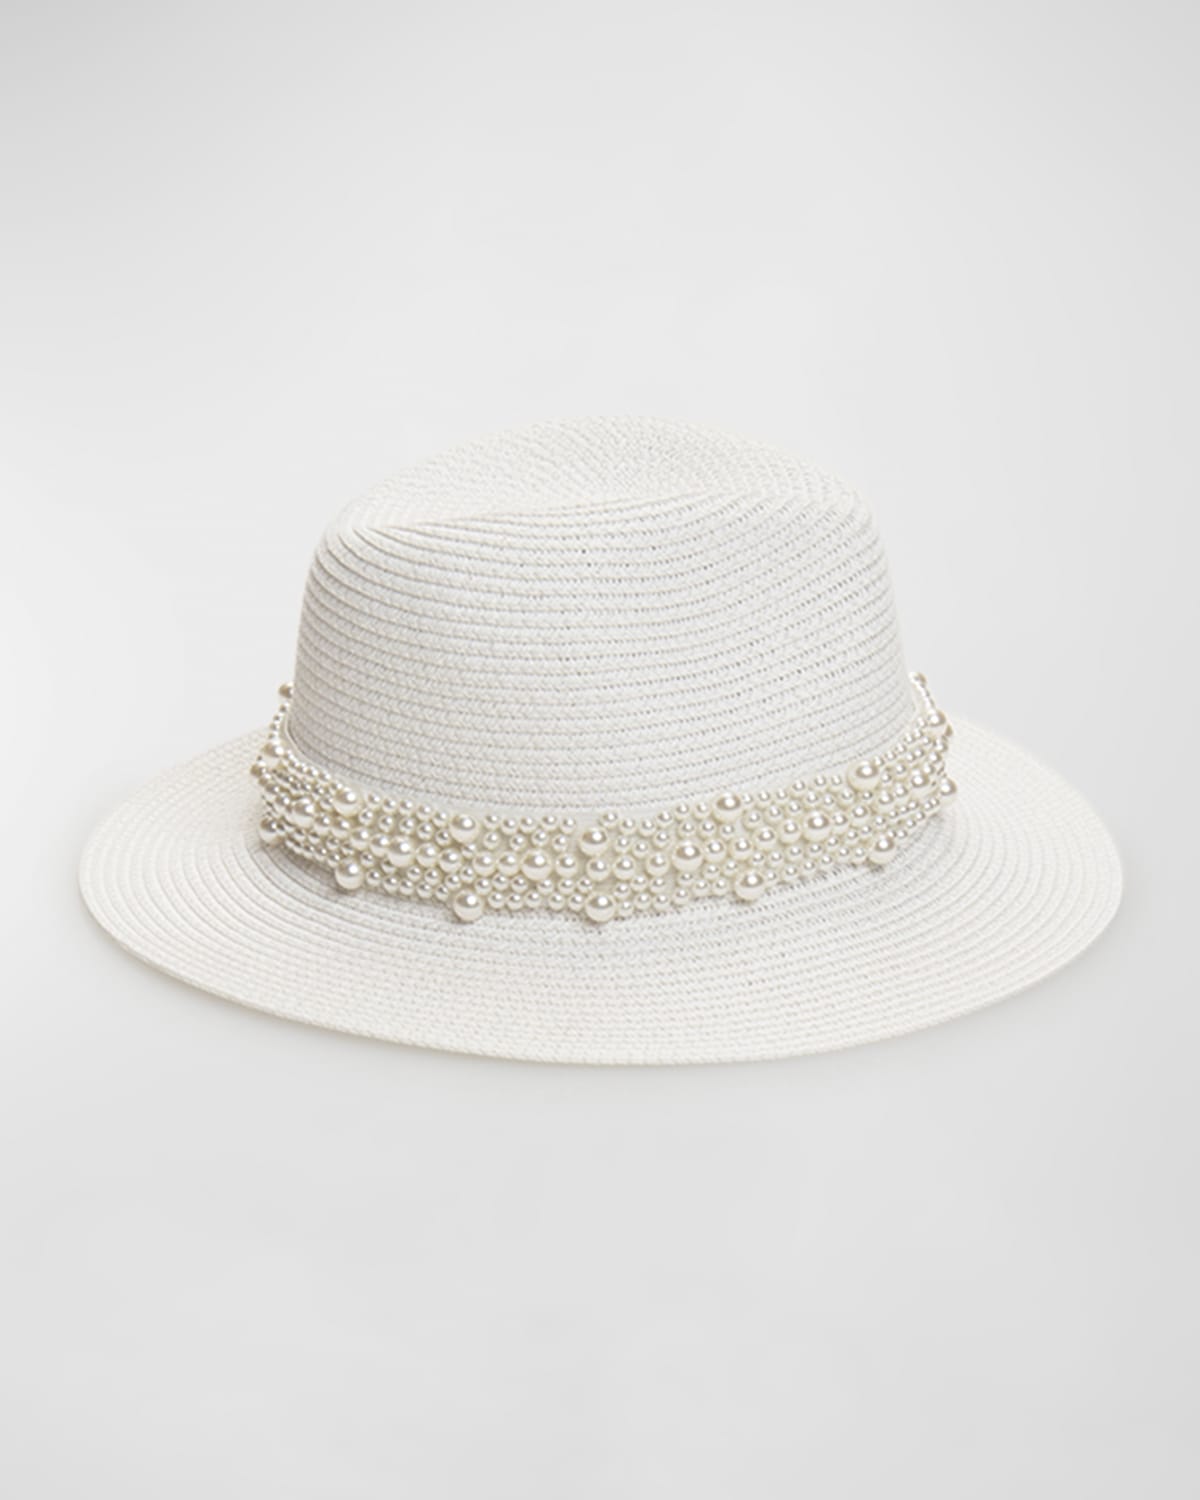 Pia Rossini Verity Straw Fedora With Pearly Band In White